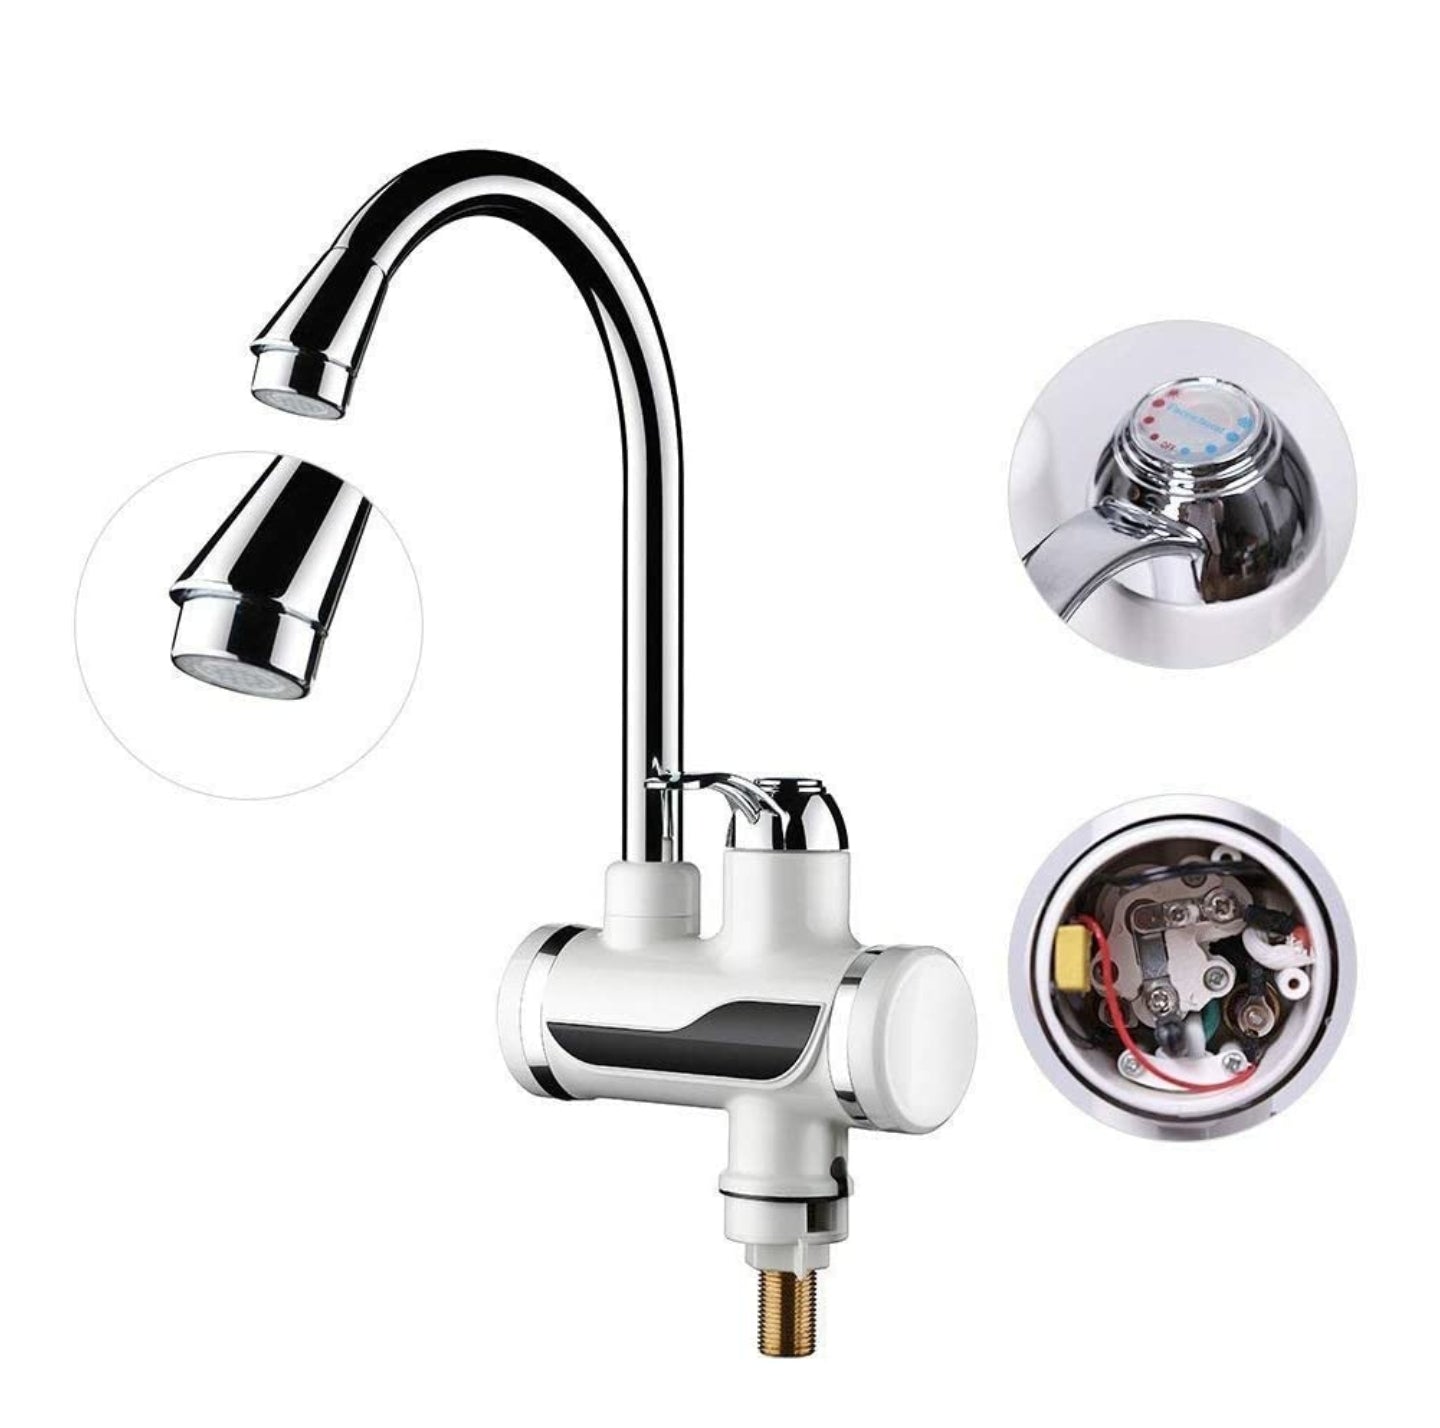 Water Heater Tap Bottom Mounted [ GOLD] Limited Edition Model